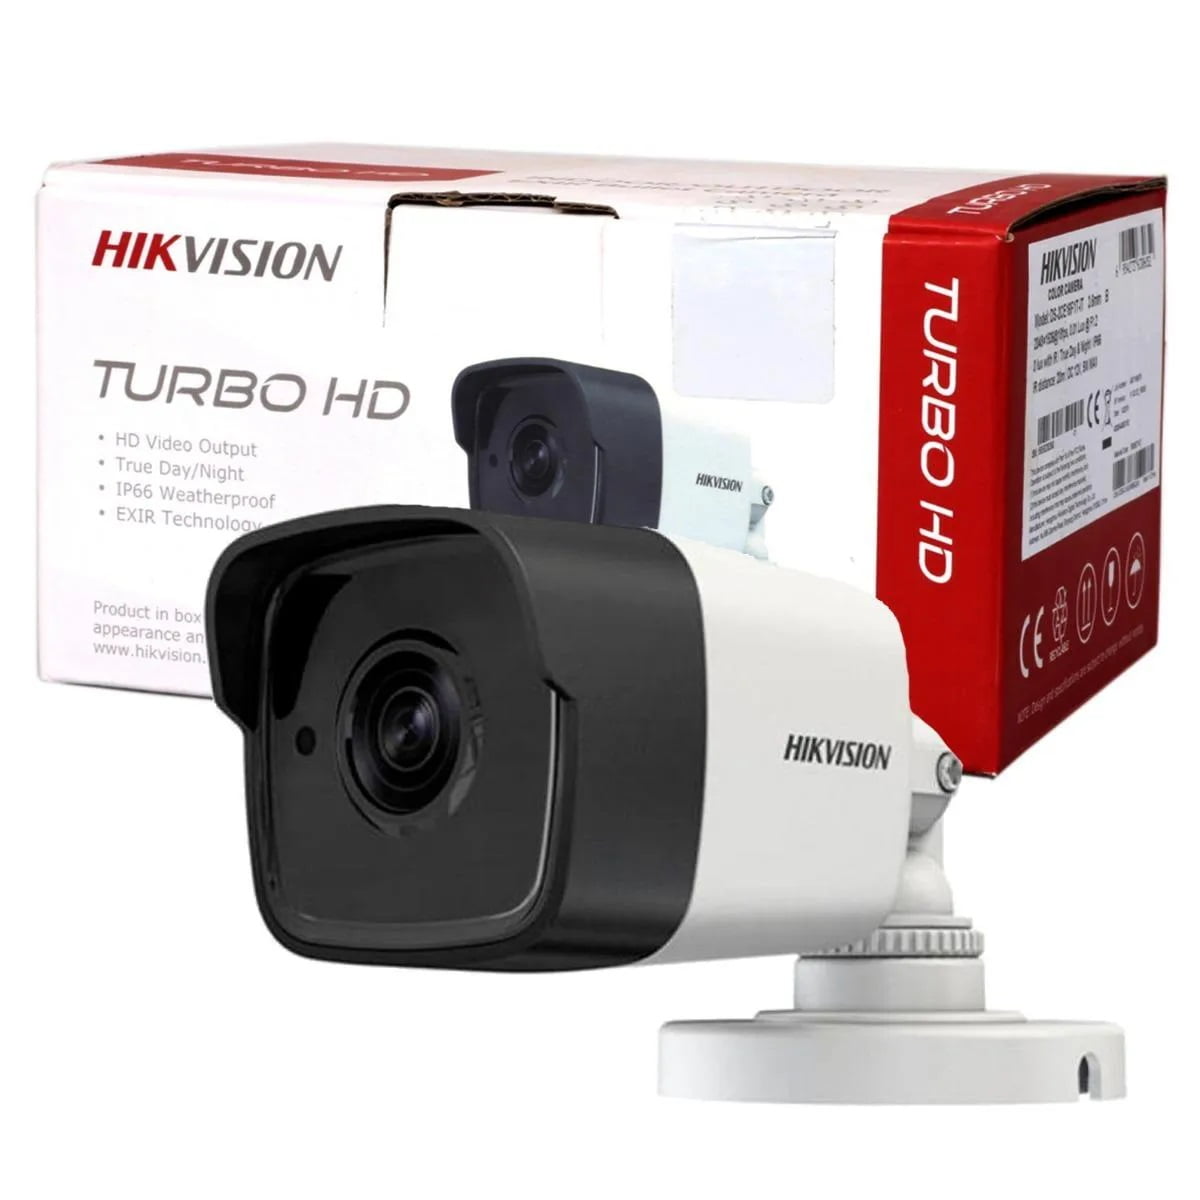 Get used to Deduct larynx HIKVISION TURBO HD IR Bullet Camera – Jenal Security